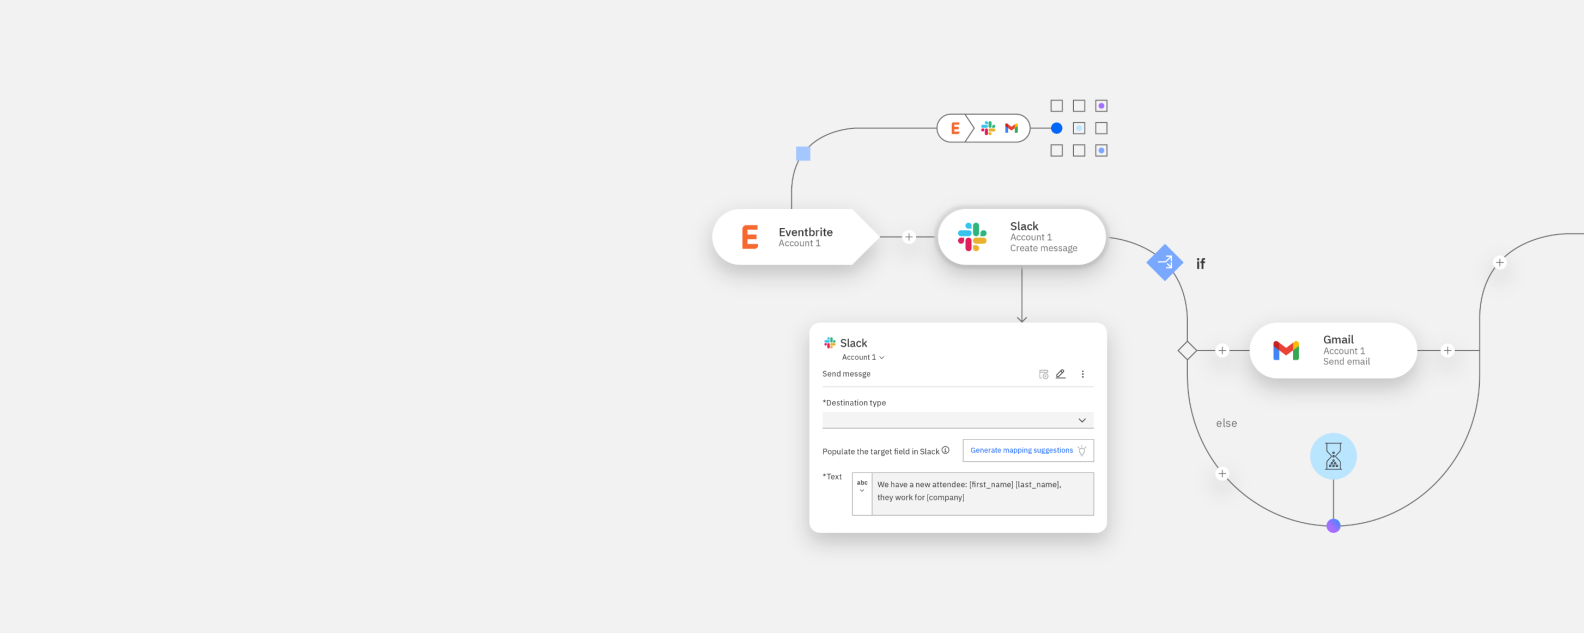 App Connect hybrid/UI illustration of an expanding flow chart